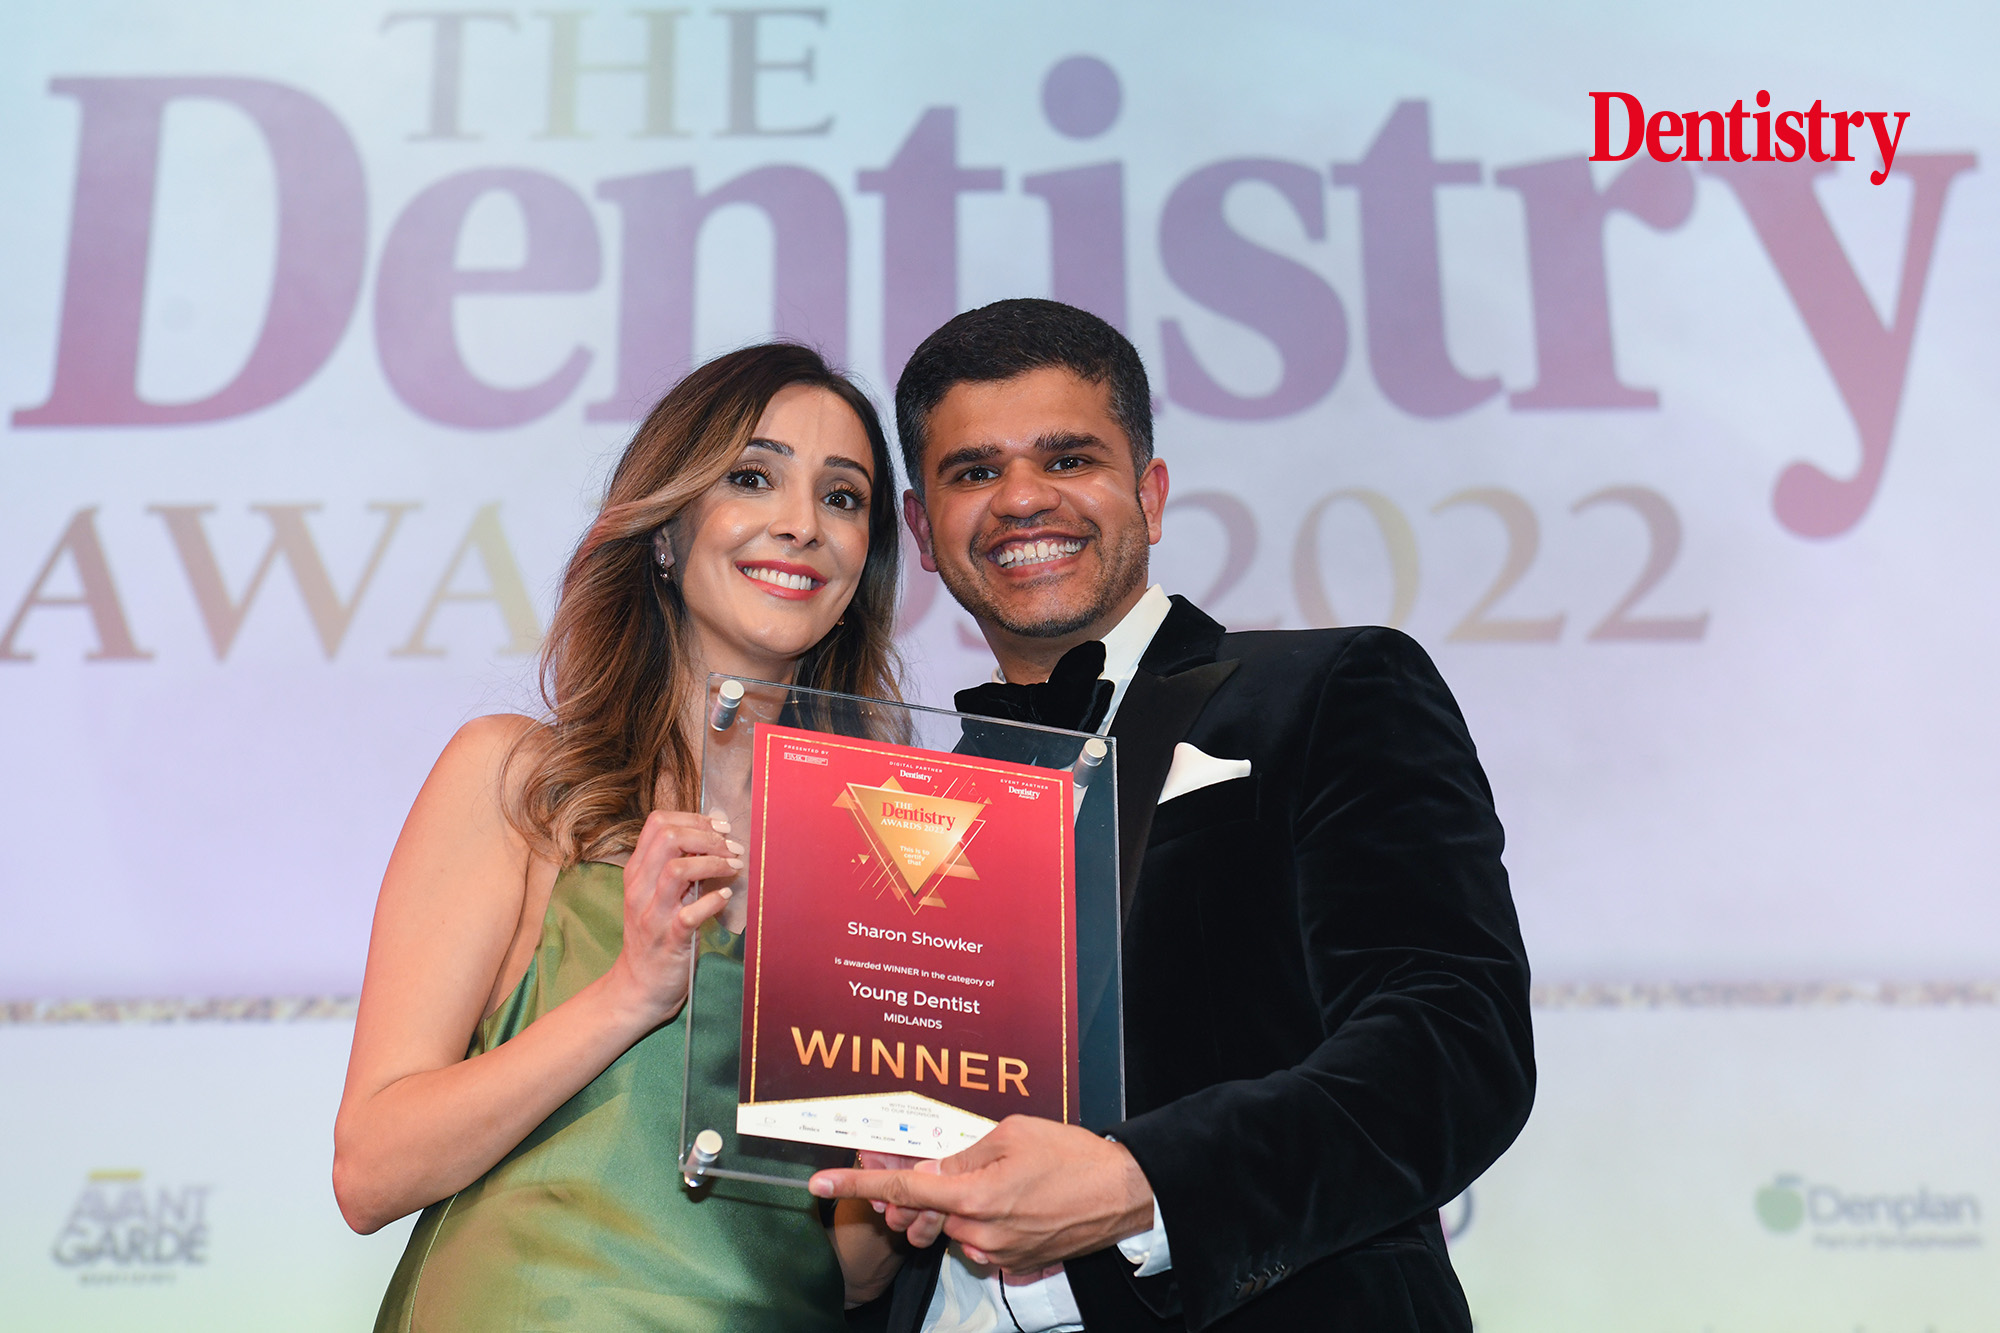 Young Dentist speaks to Sharon Showker about winning Young Dentist Midlands, and how to submit a winning entry.